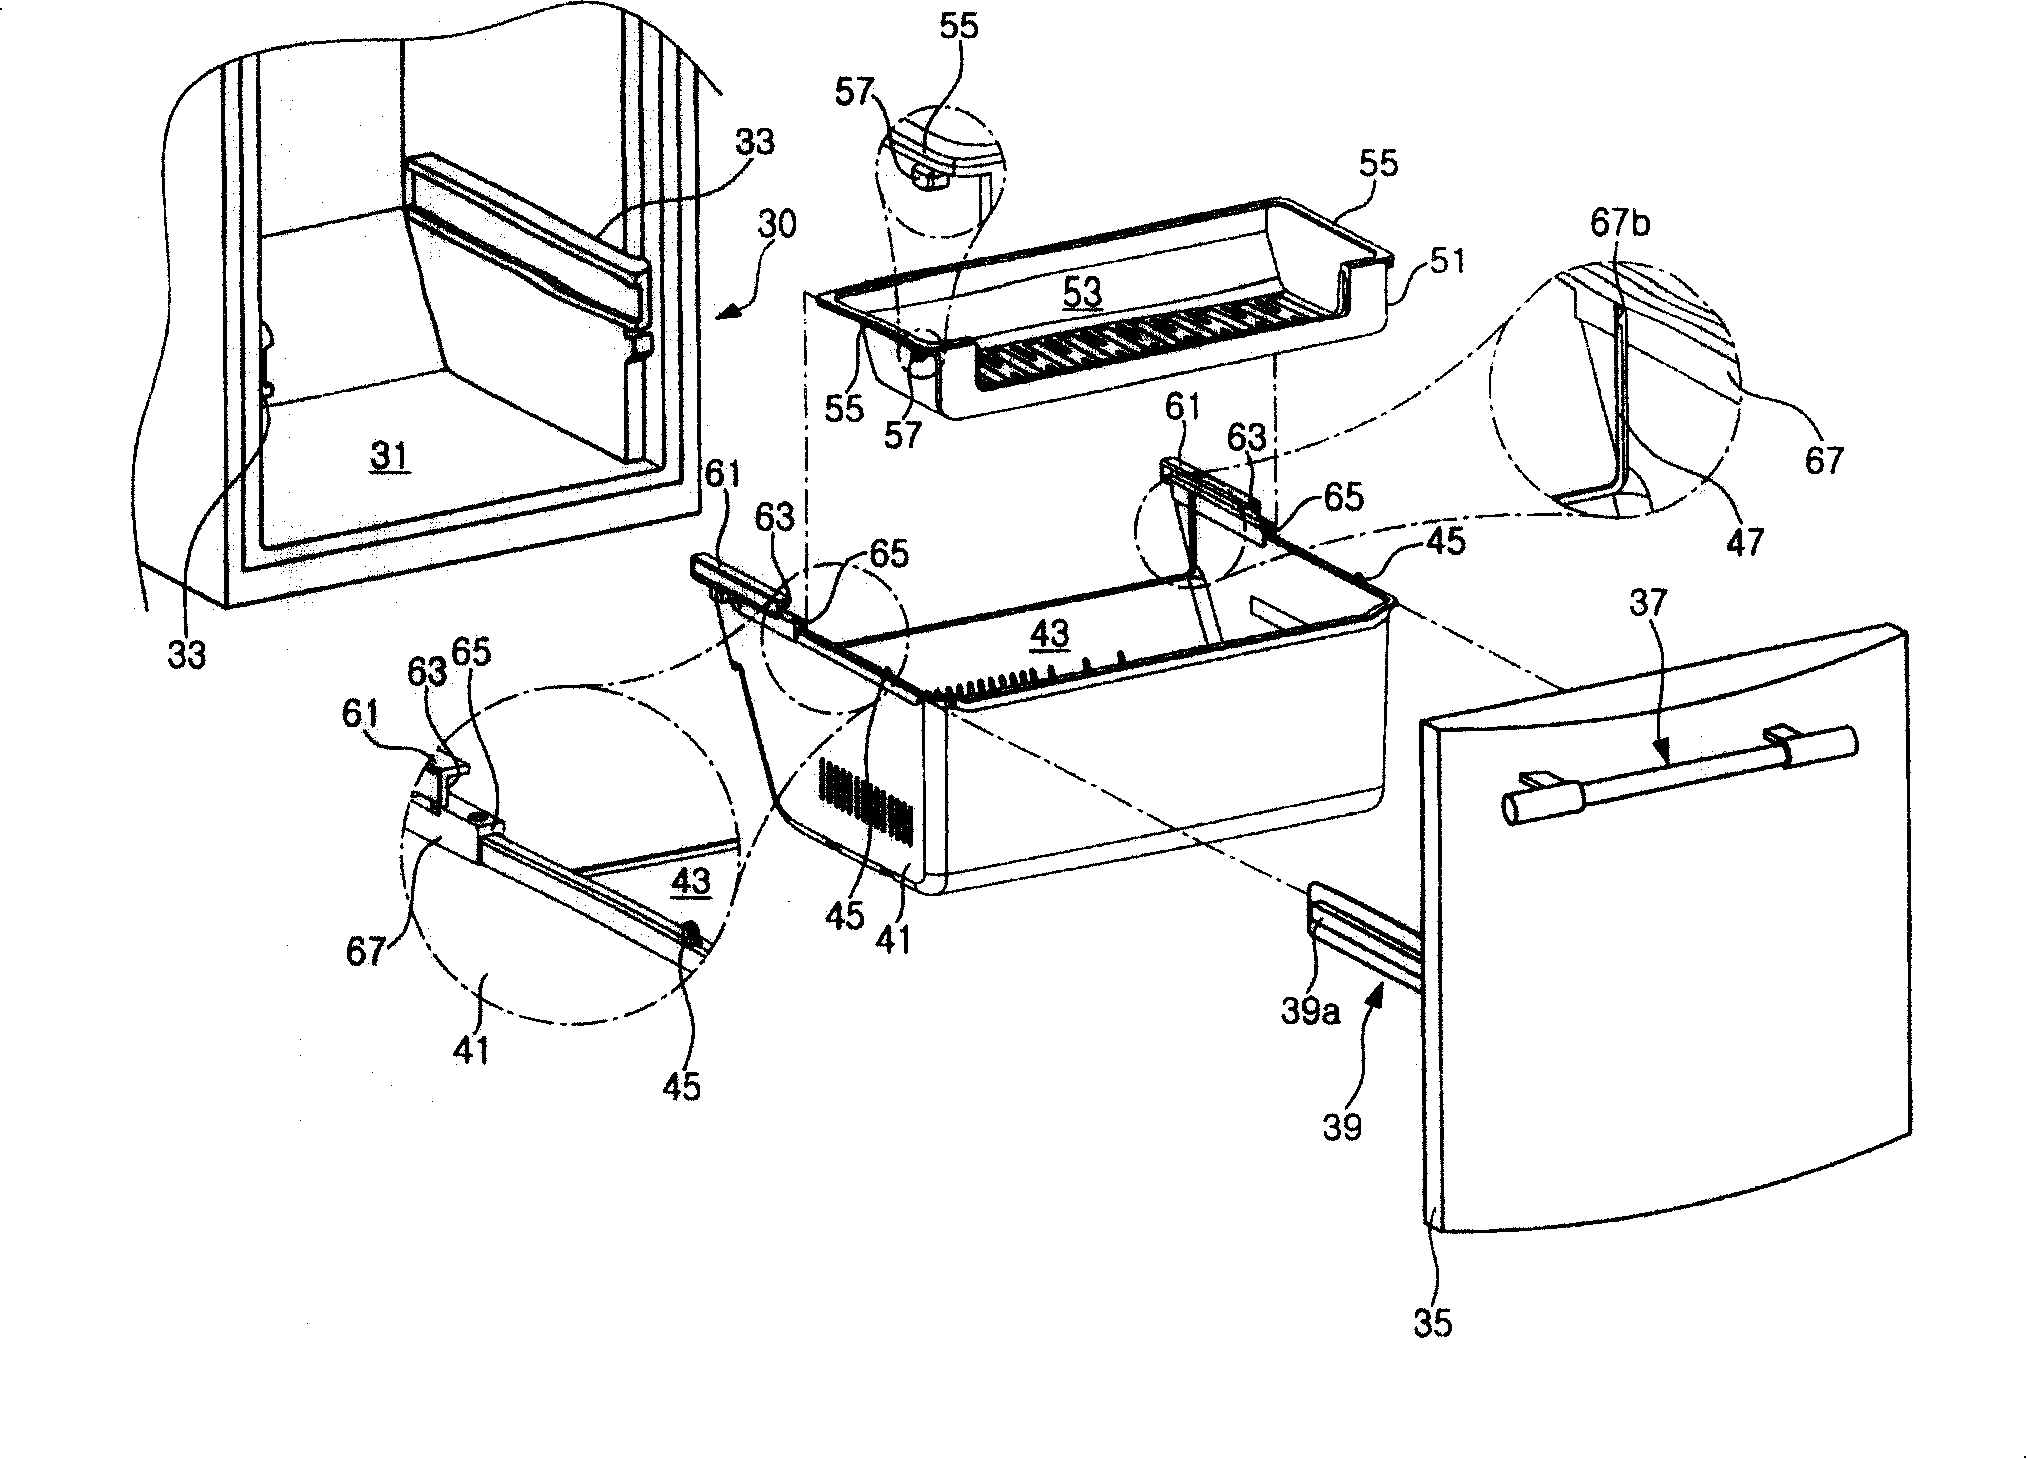 Pallet stretching-out device for refrigerator